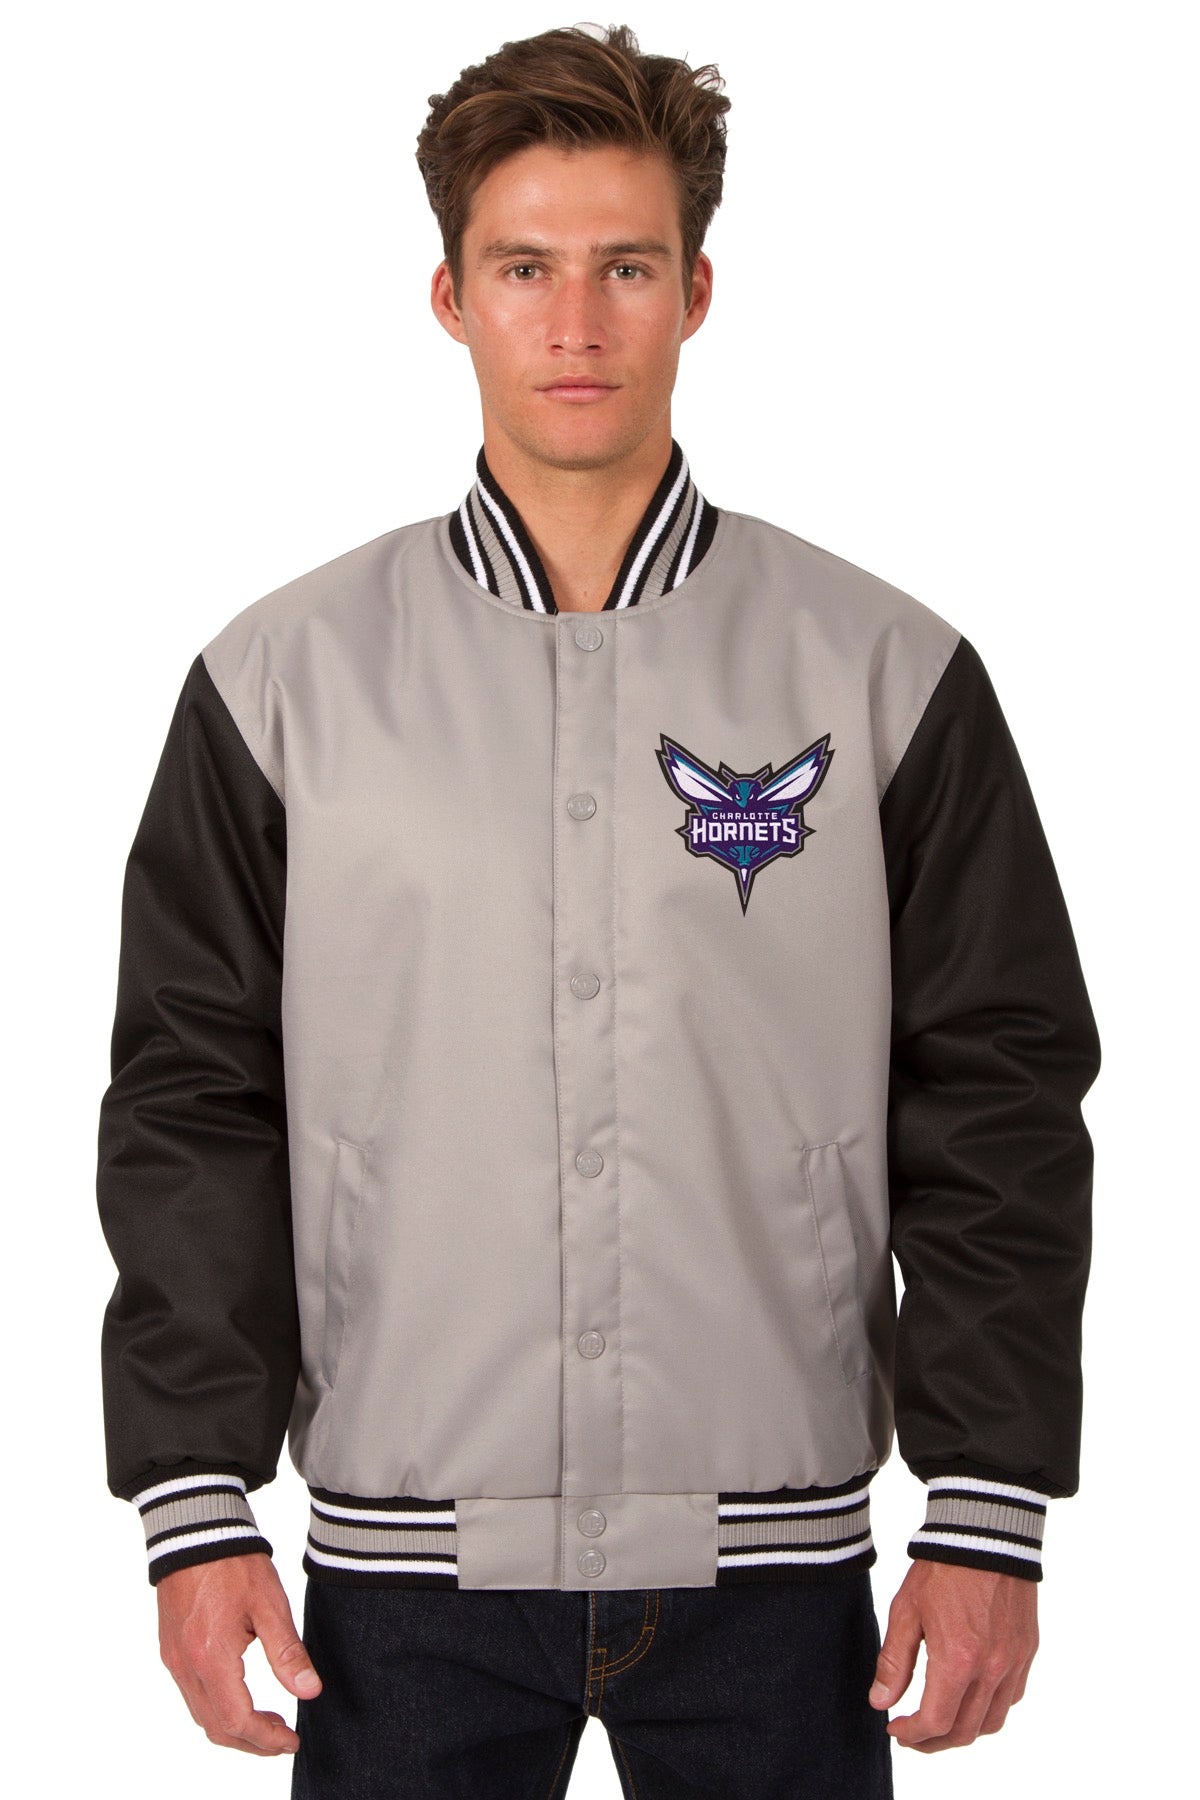 Charlotte Hornets Poly-Twill Jacket